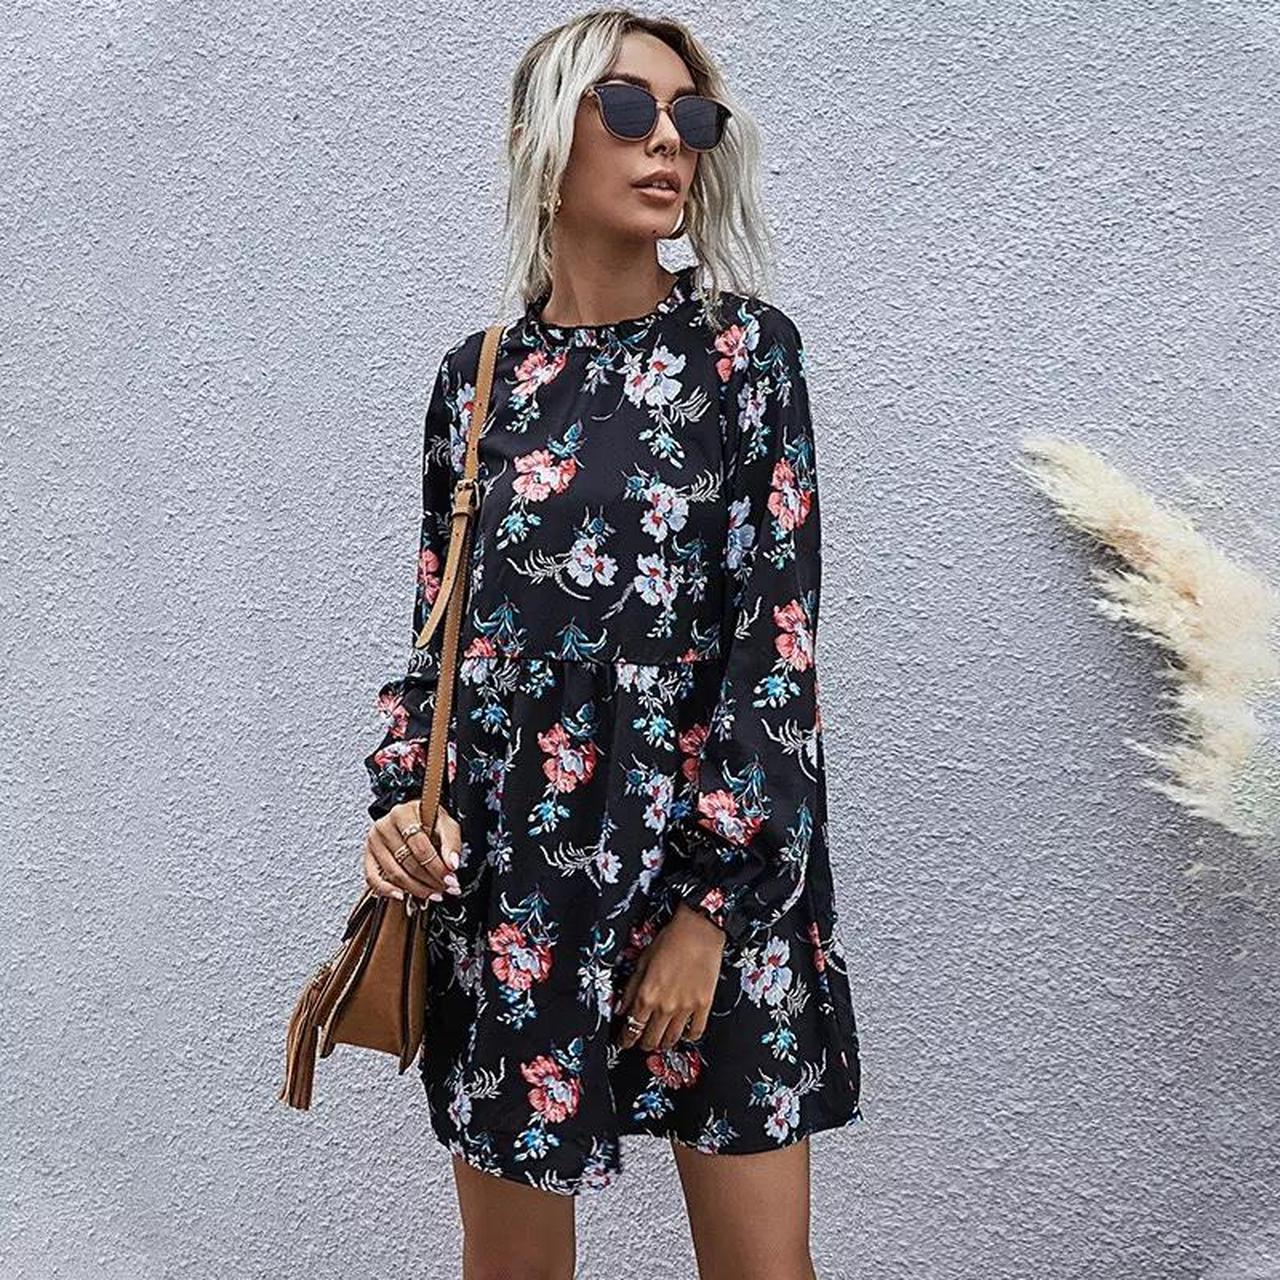 Cute Floral Dress Free shipping (usually takes 3-4... - Depop